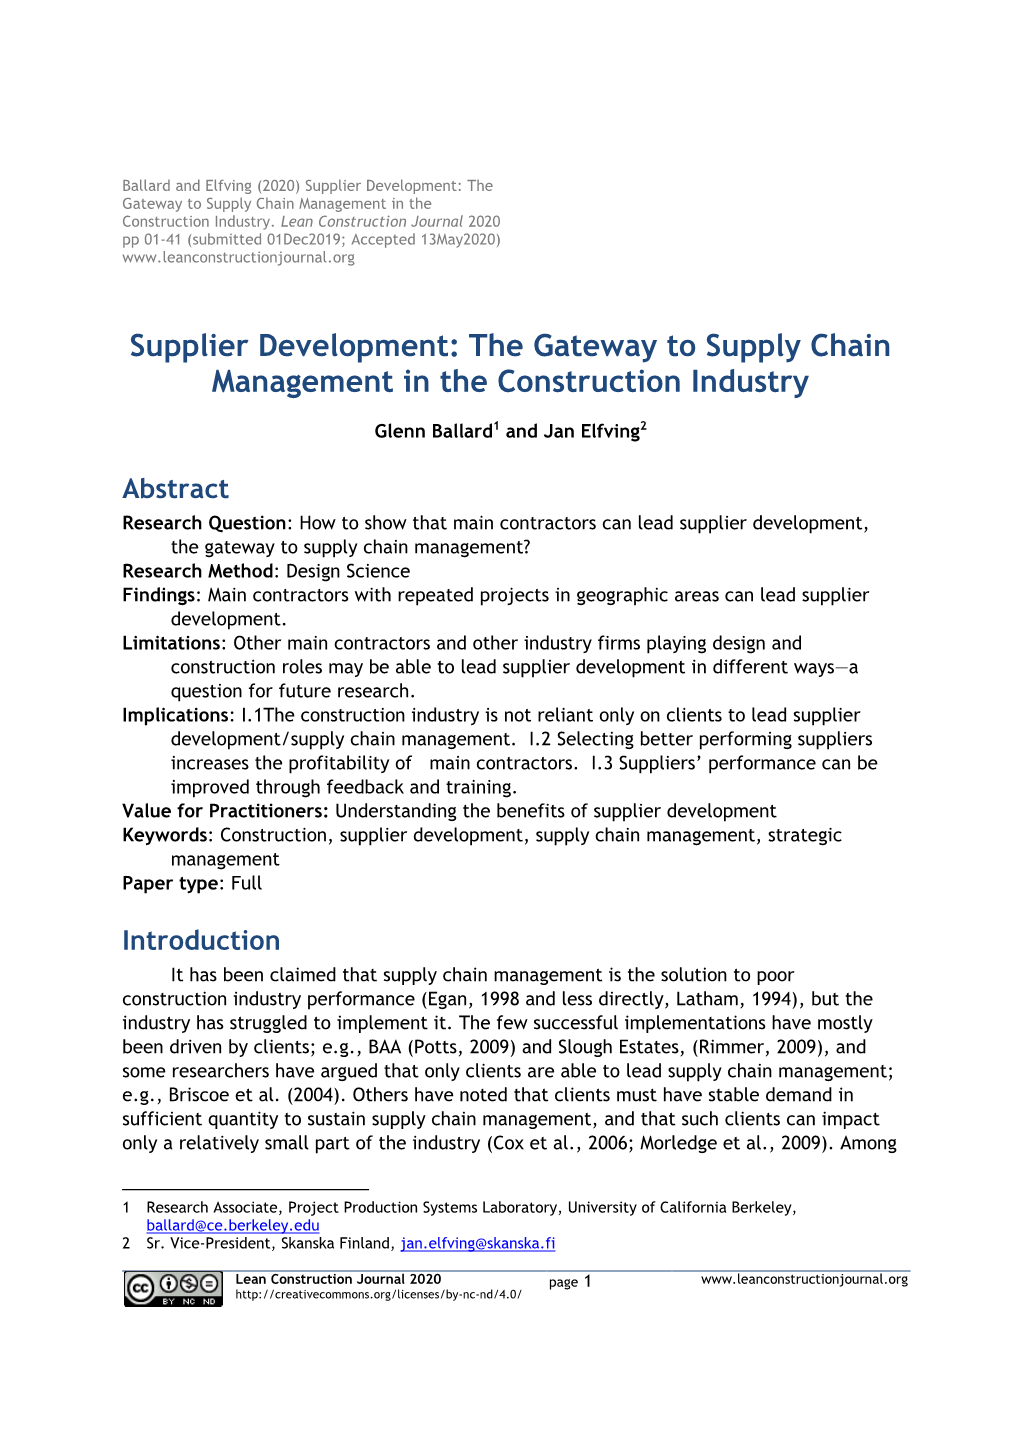 Supplier Development: the Gateway to Supply Chain Management in the Construction Industry